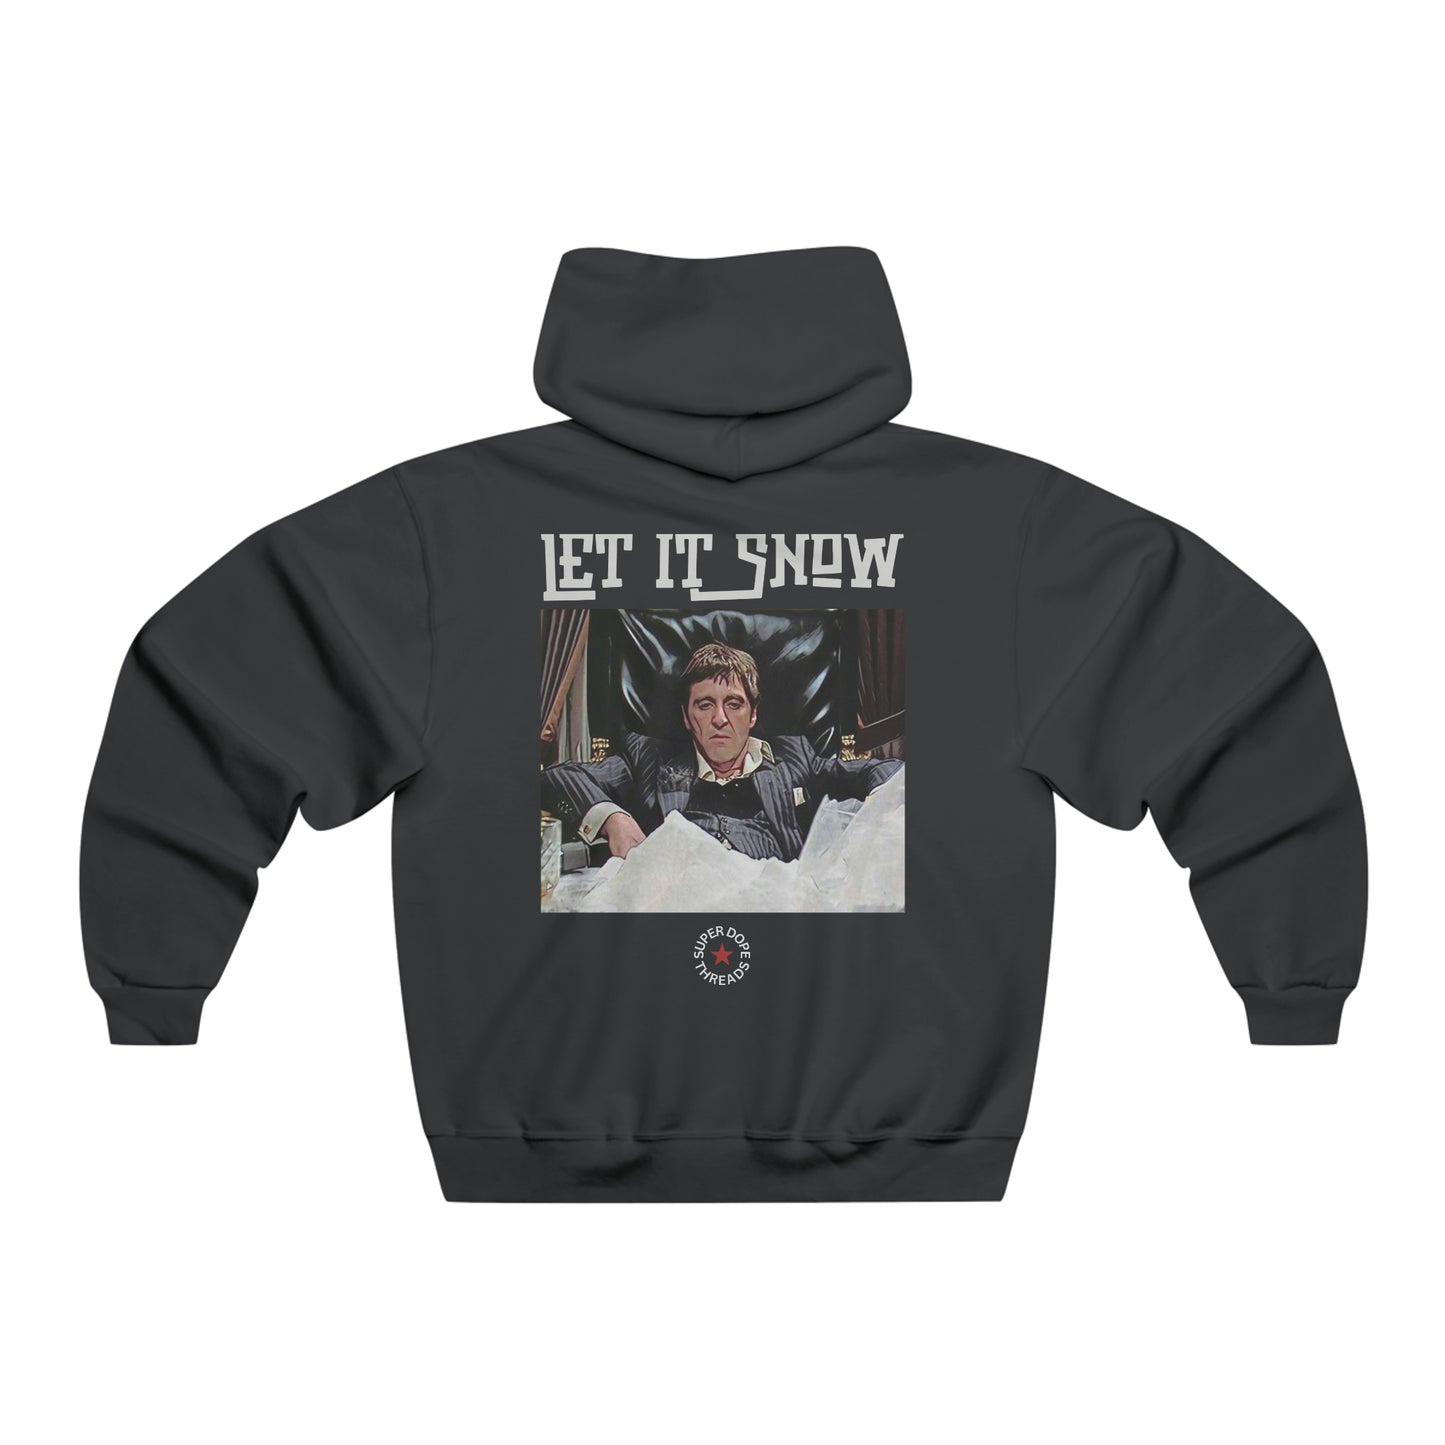 Super Dope Threads - The Chad (Let it snow) Hoodie